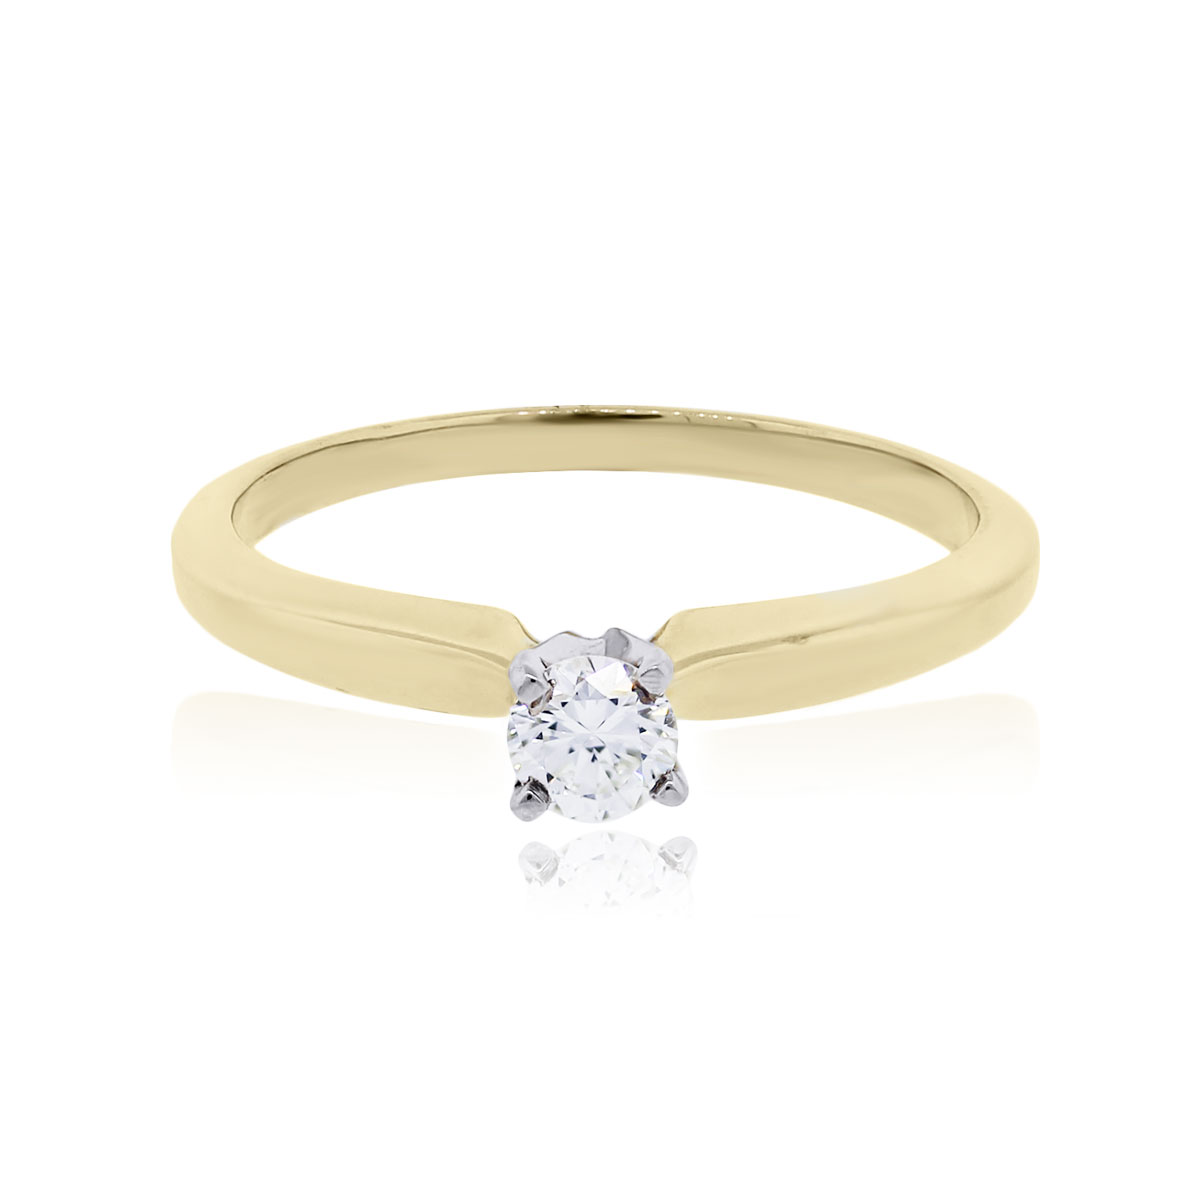 Details about   0.10 Ct Trillion Cut Diamond Solitaire Engagement Ring Band 14K Yellow Gold